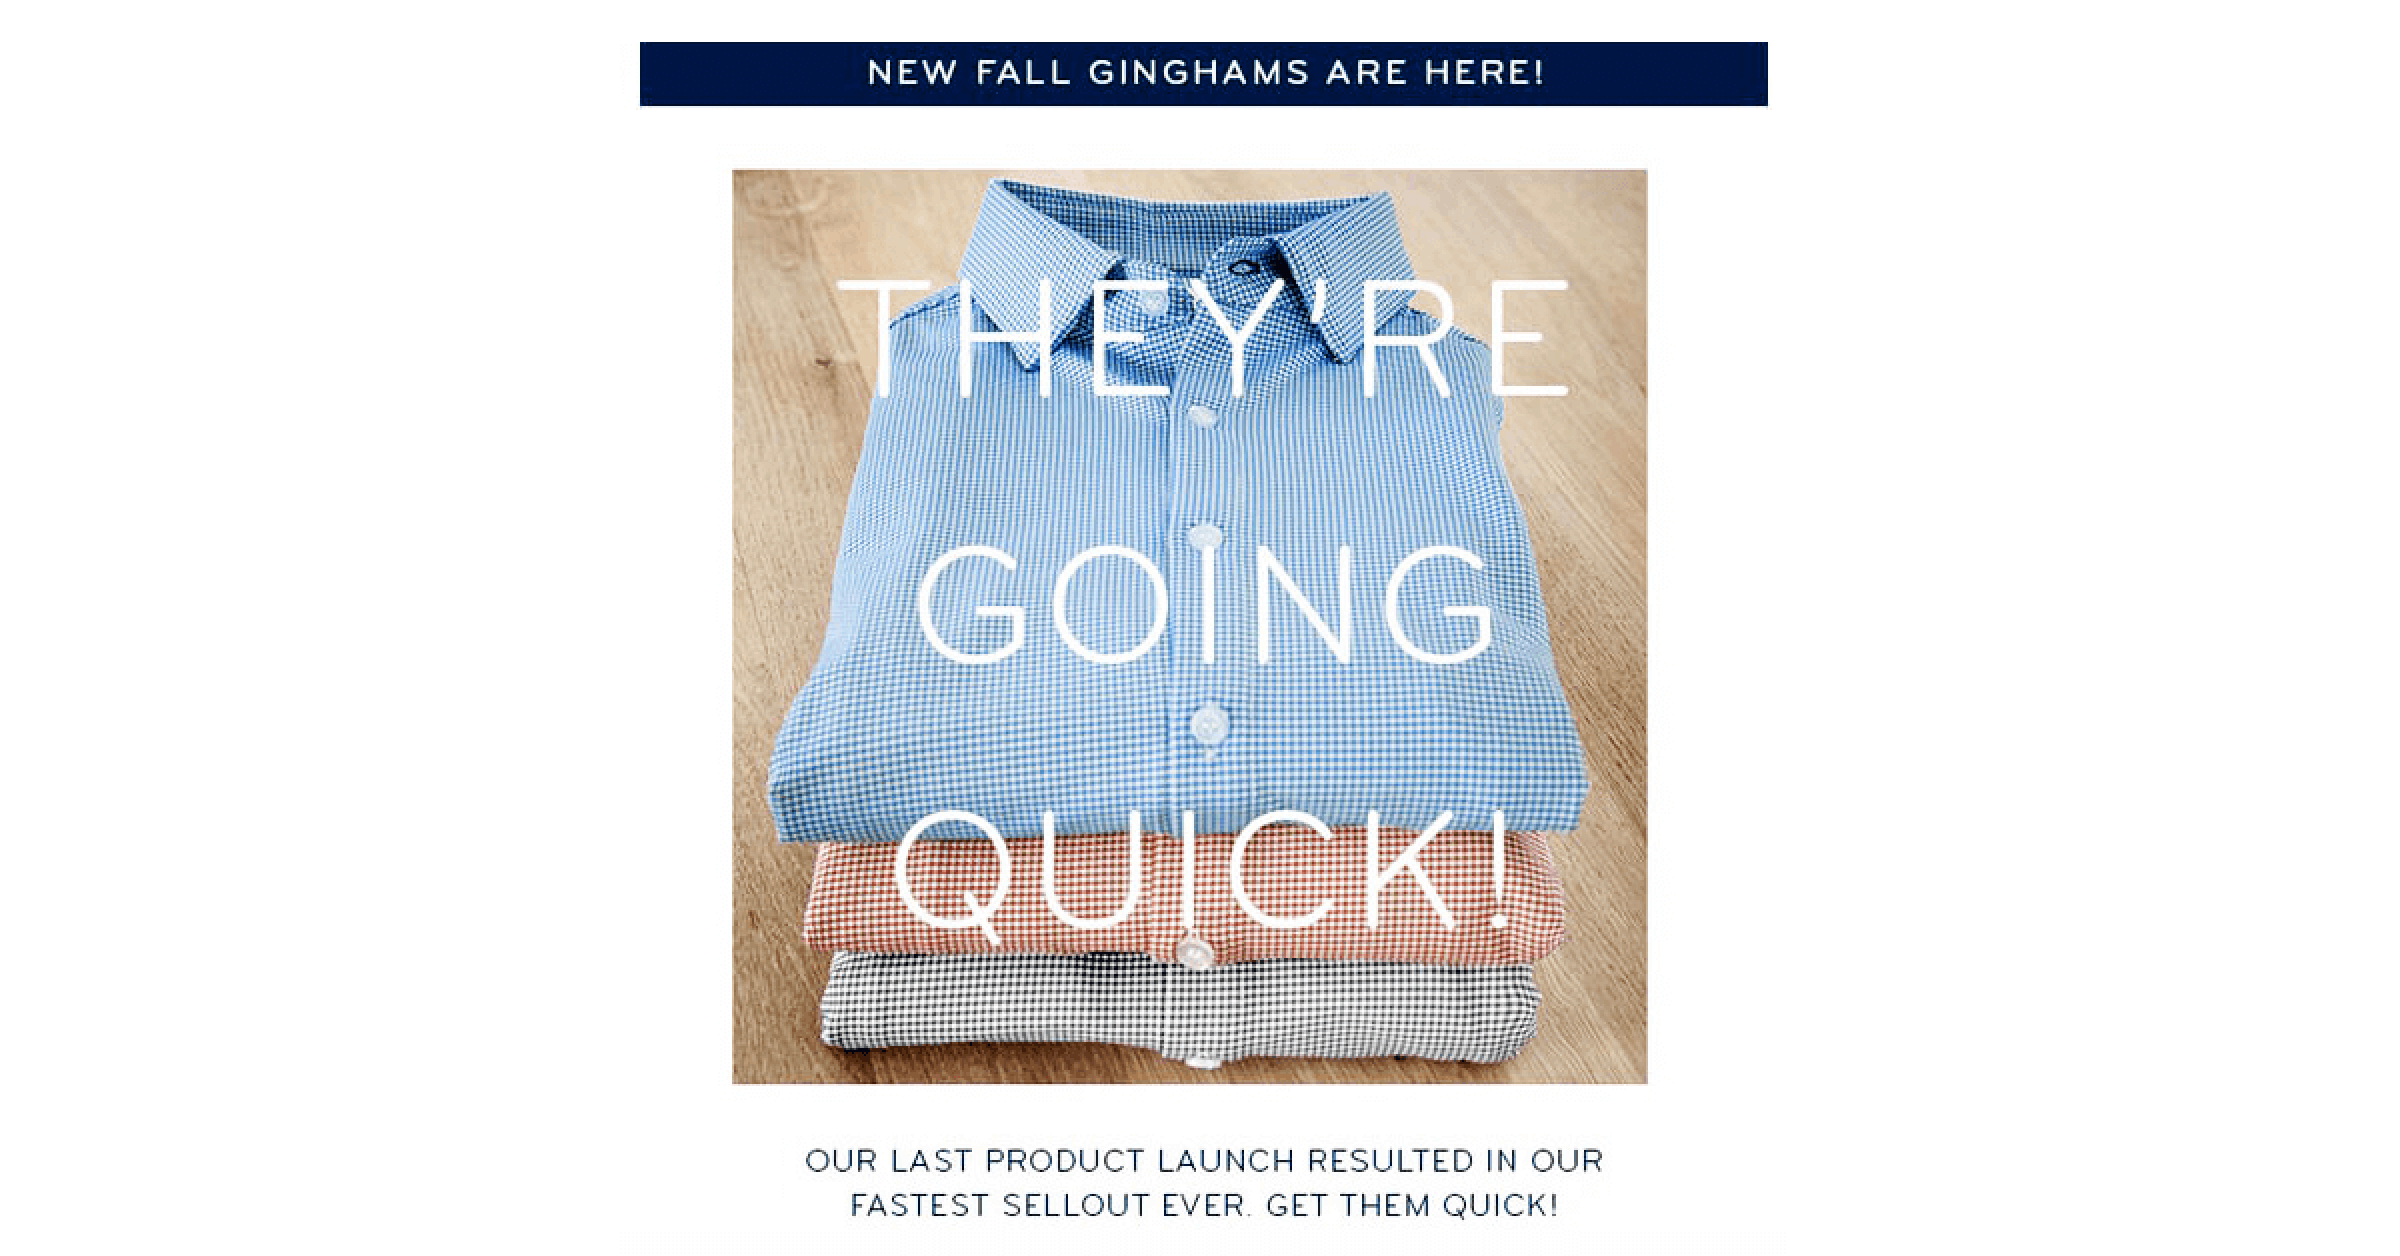 Using scarcity principle in automated email by Mizzen+Main